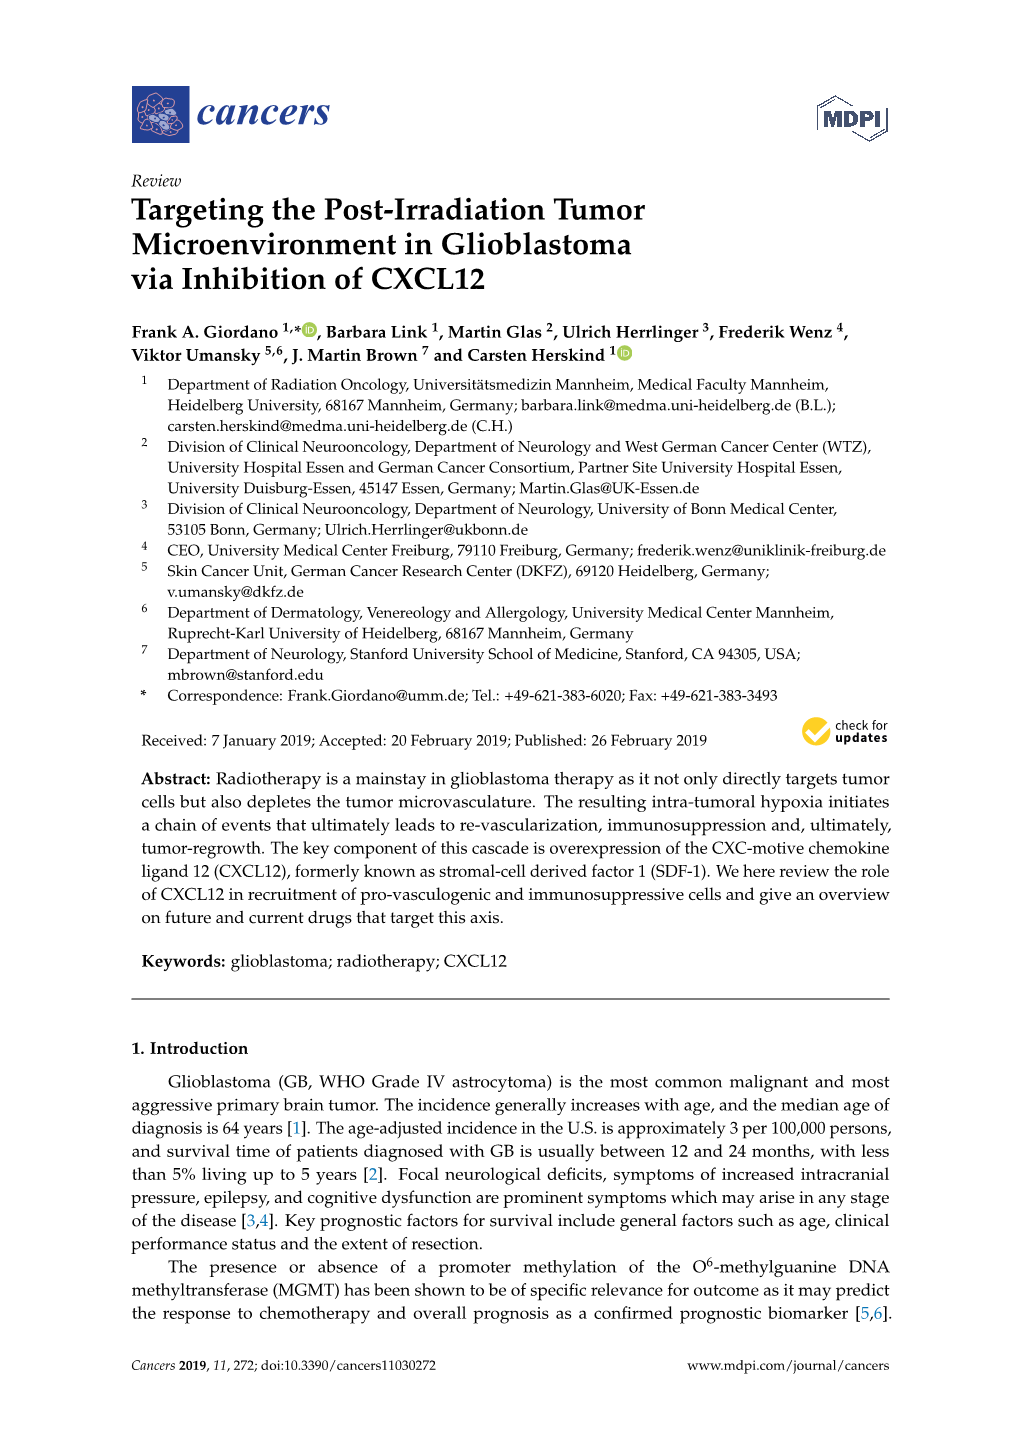 Targeting the Post-Irradiation Tumor Microenvironment in Glioblastoma Via Inhibition of CXCL12